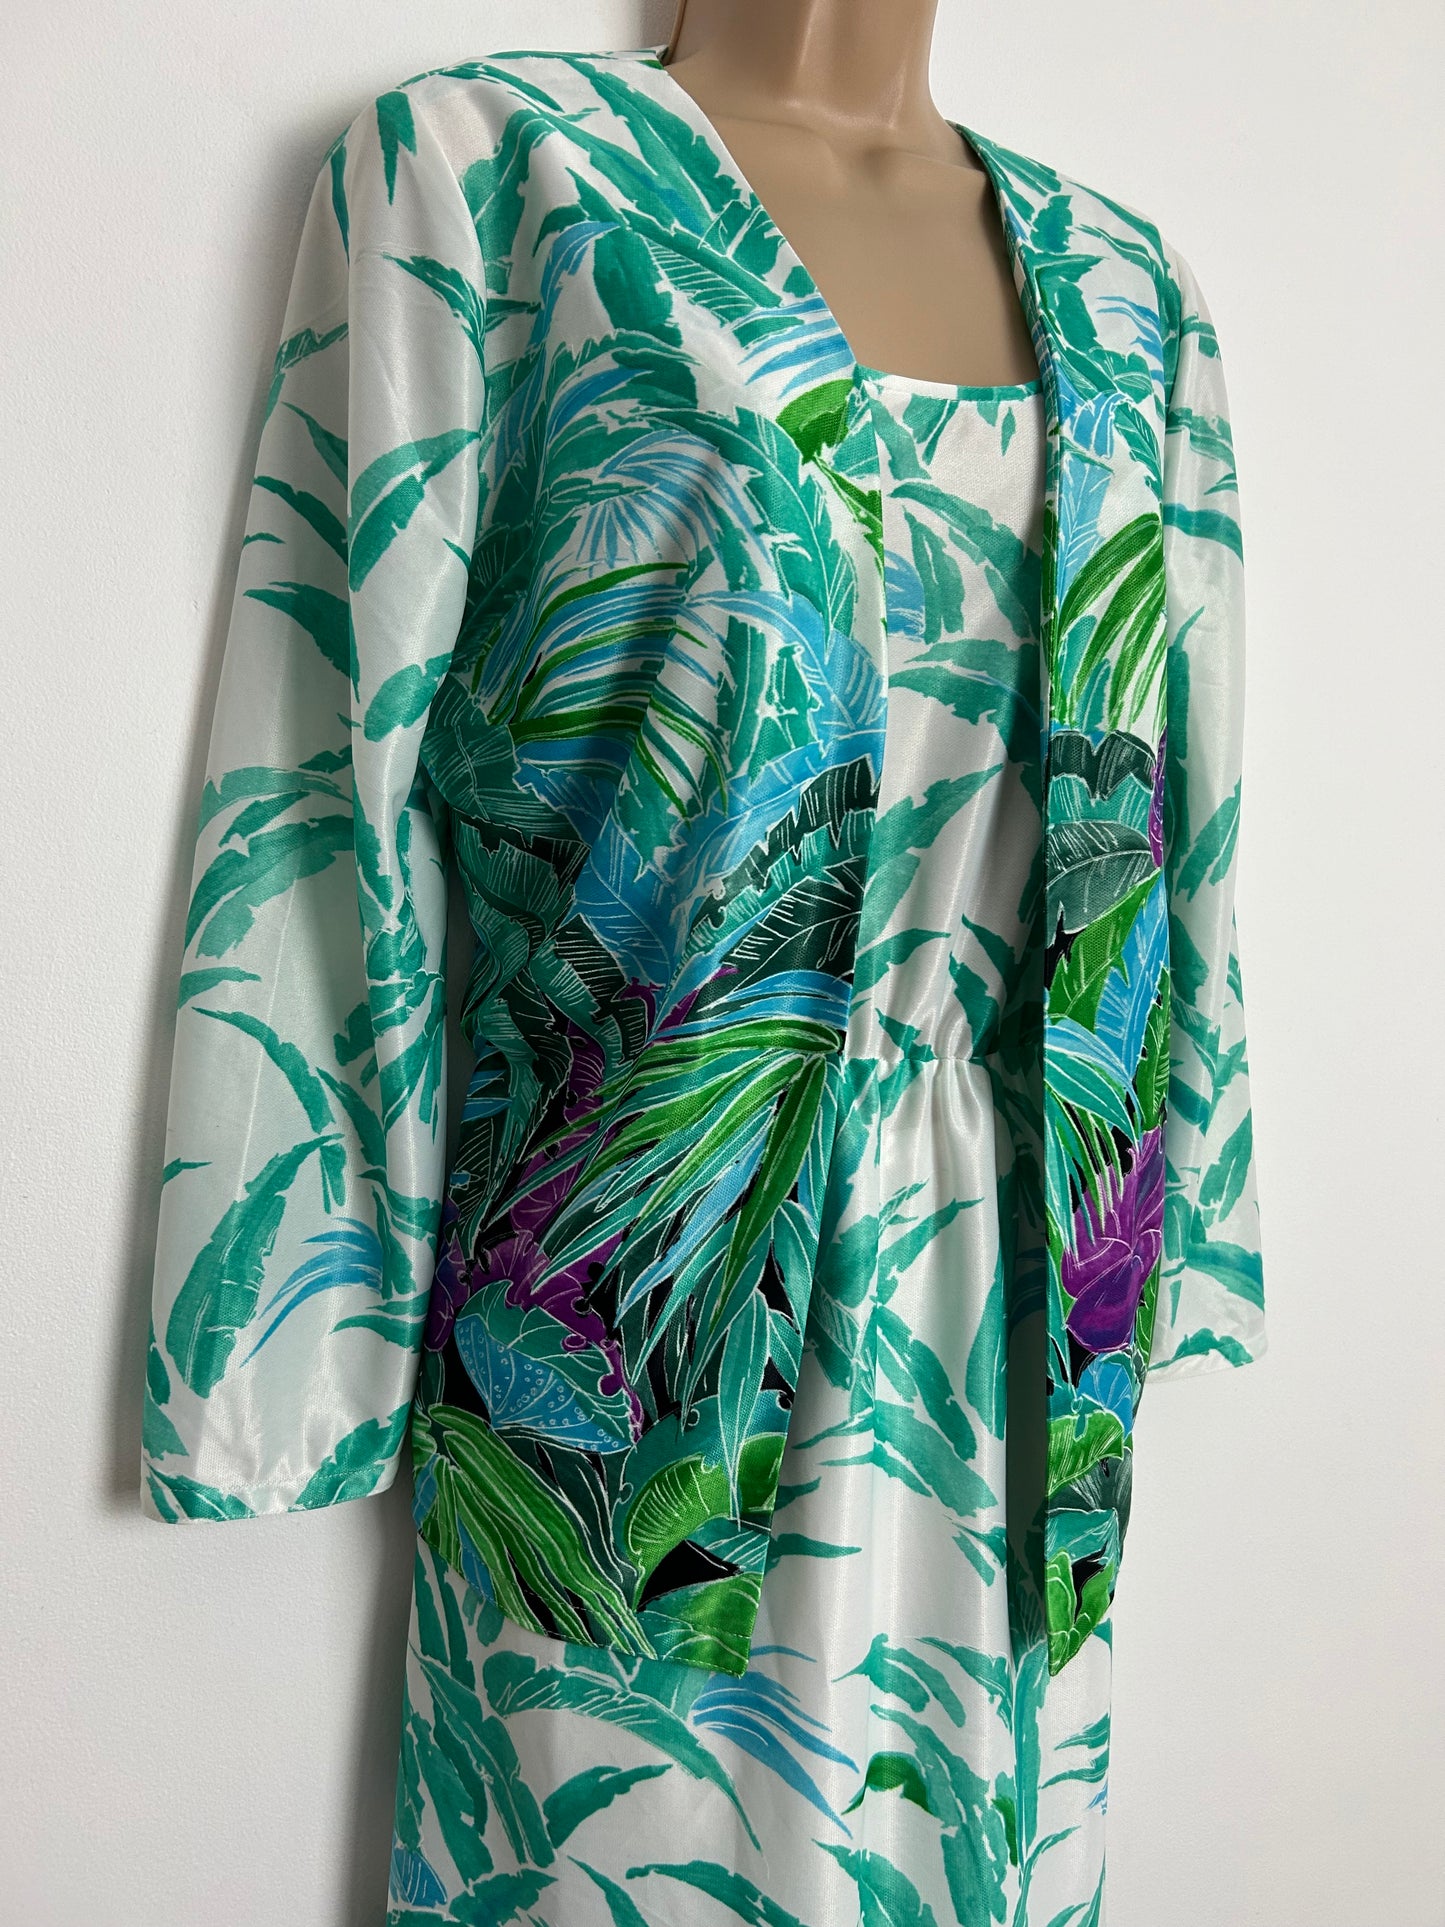 Vintage Early 1980s LAURA PHILLIPS UK Size 12 White & Green Tropical Leaf Print Summer Maxi Dress & Matching Jacket